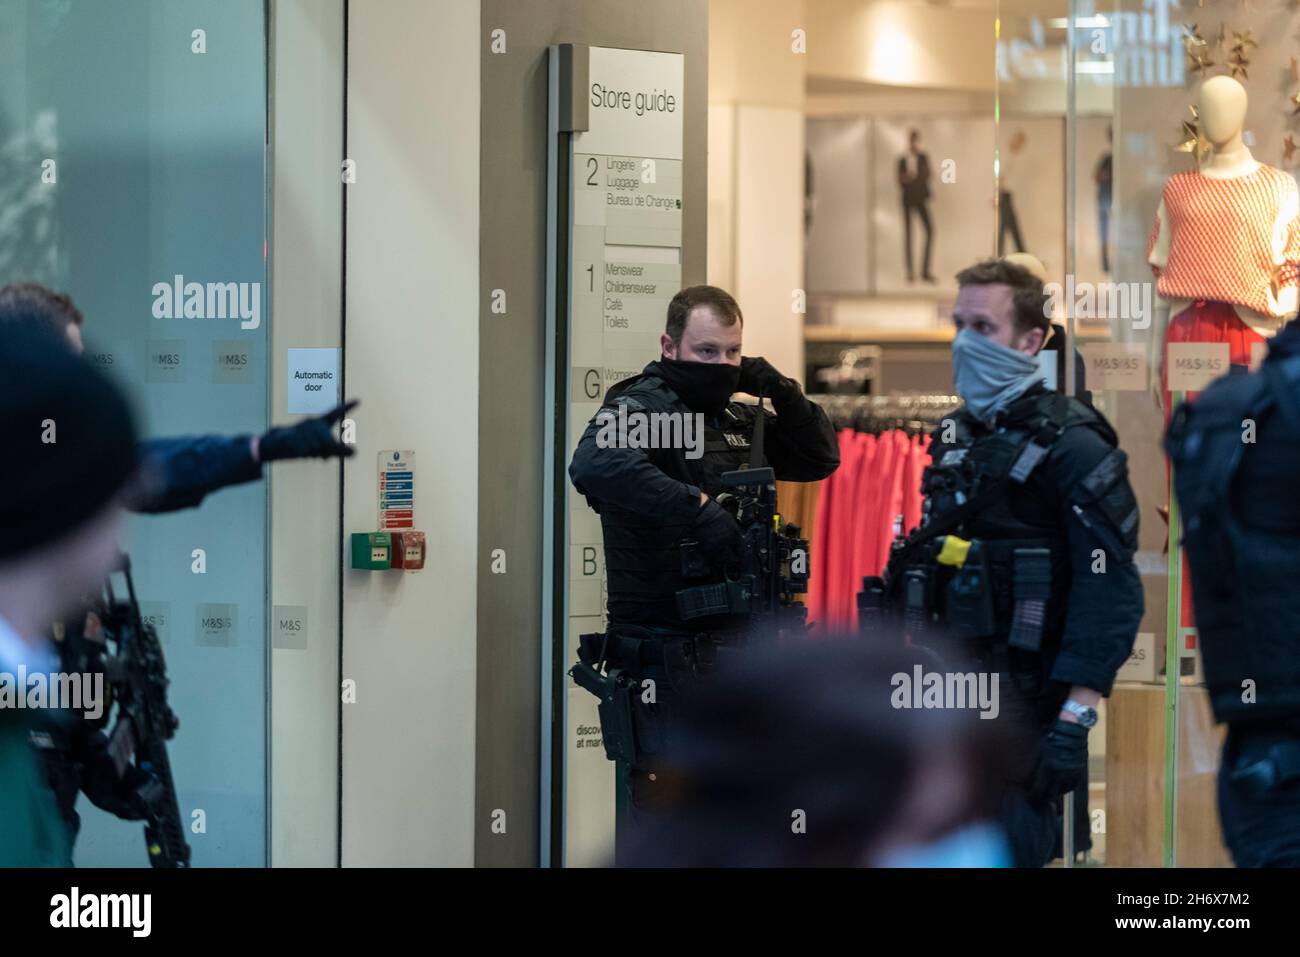 London, UK.  18 November 2021.  Armed police respond to an incident at Marks & Spencer, The Pantheon, on Oxford Street.  A cordon has been placed around the store and there is a report that a man was seen inside the store carrying a knife causing panic amongst shoppers.  Credit: Stephen Chung / Alamy Live News Stock Photo